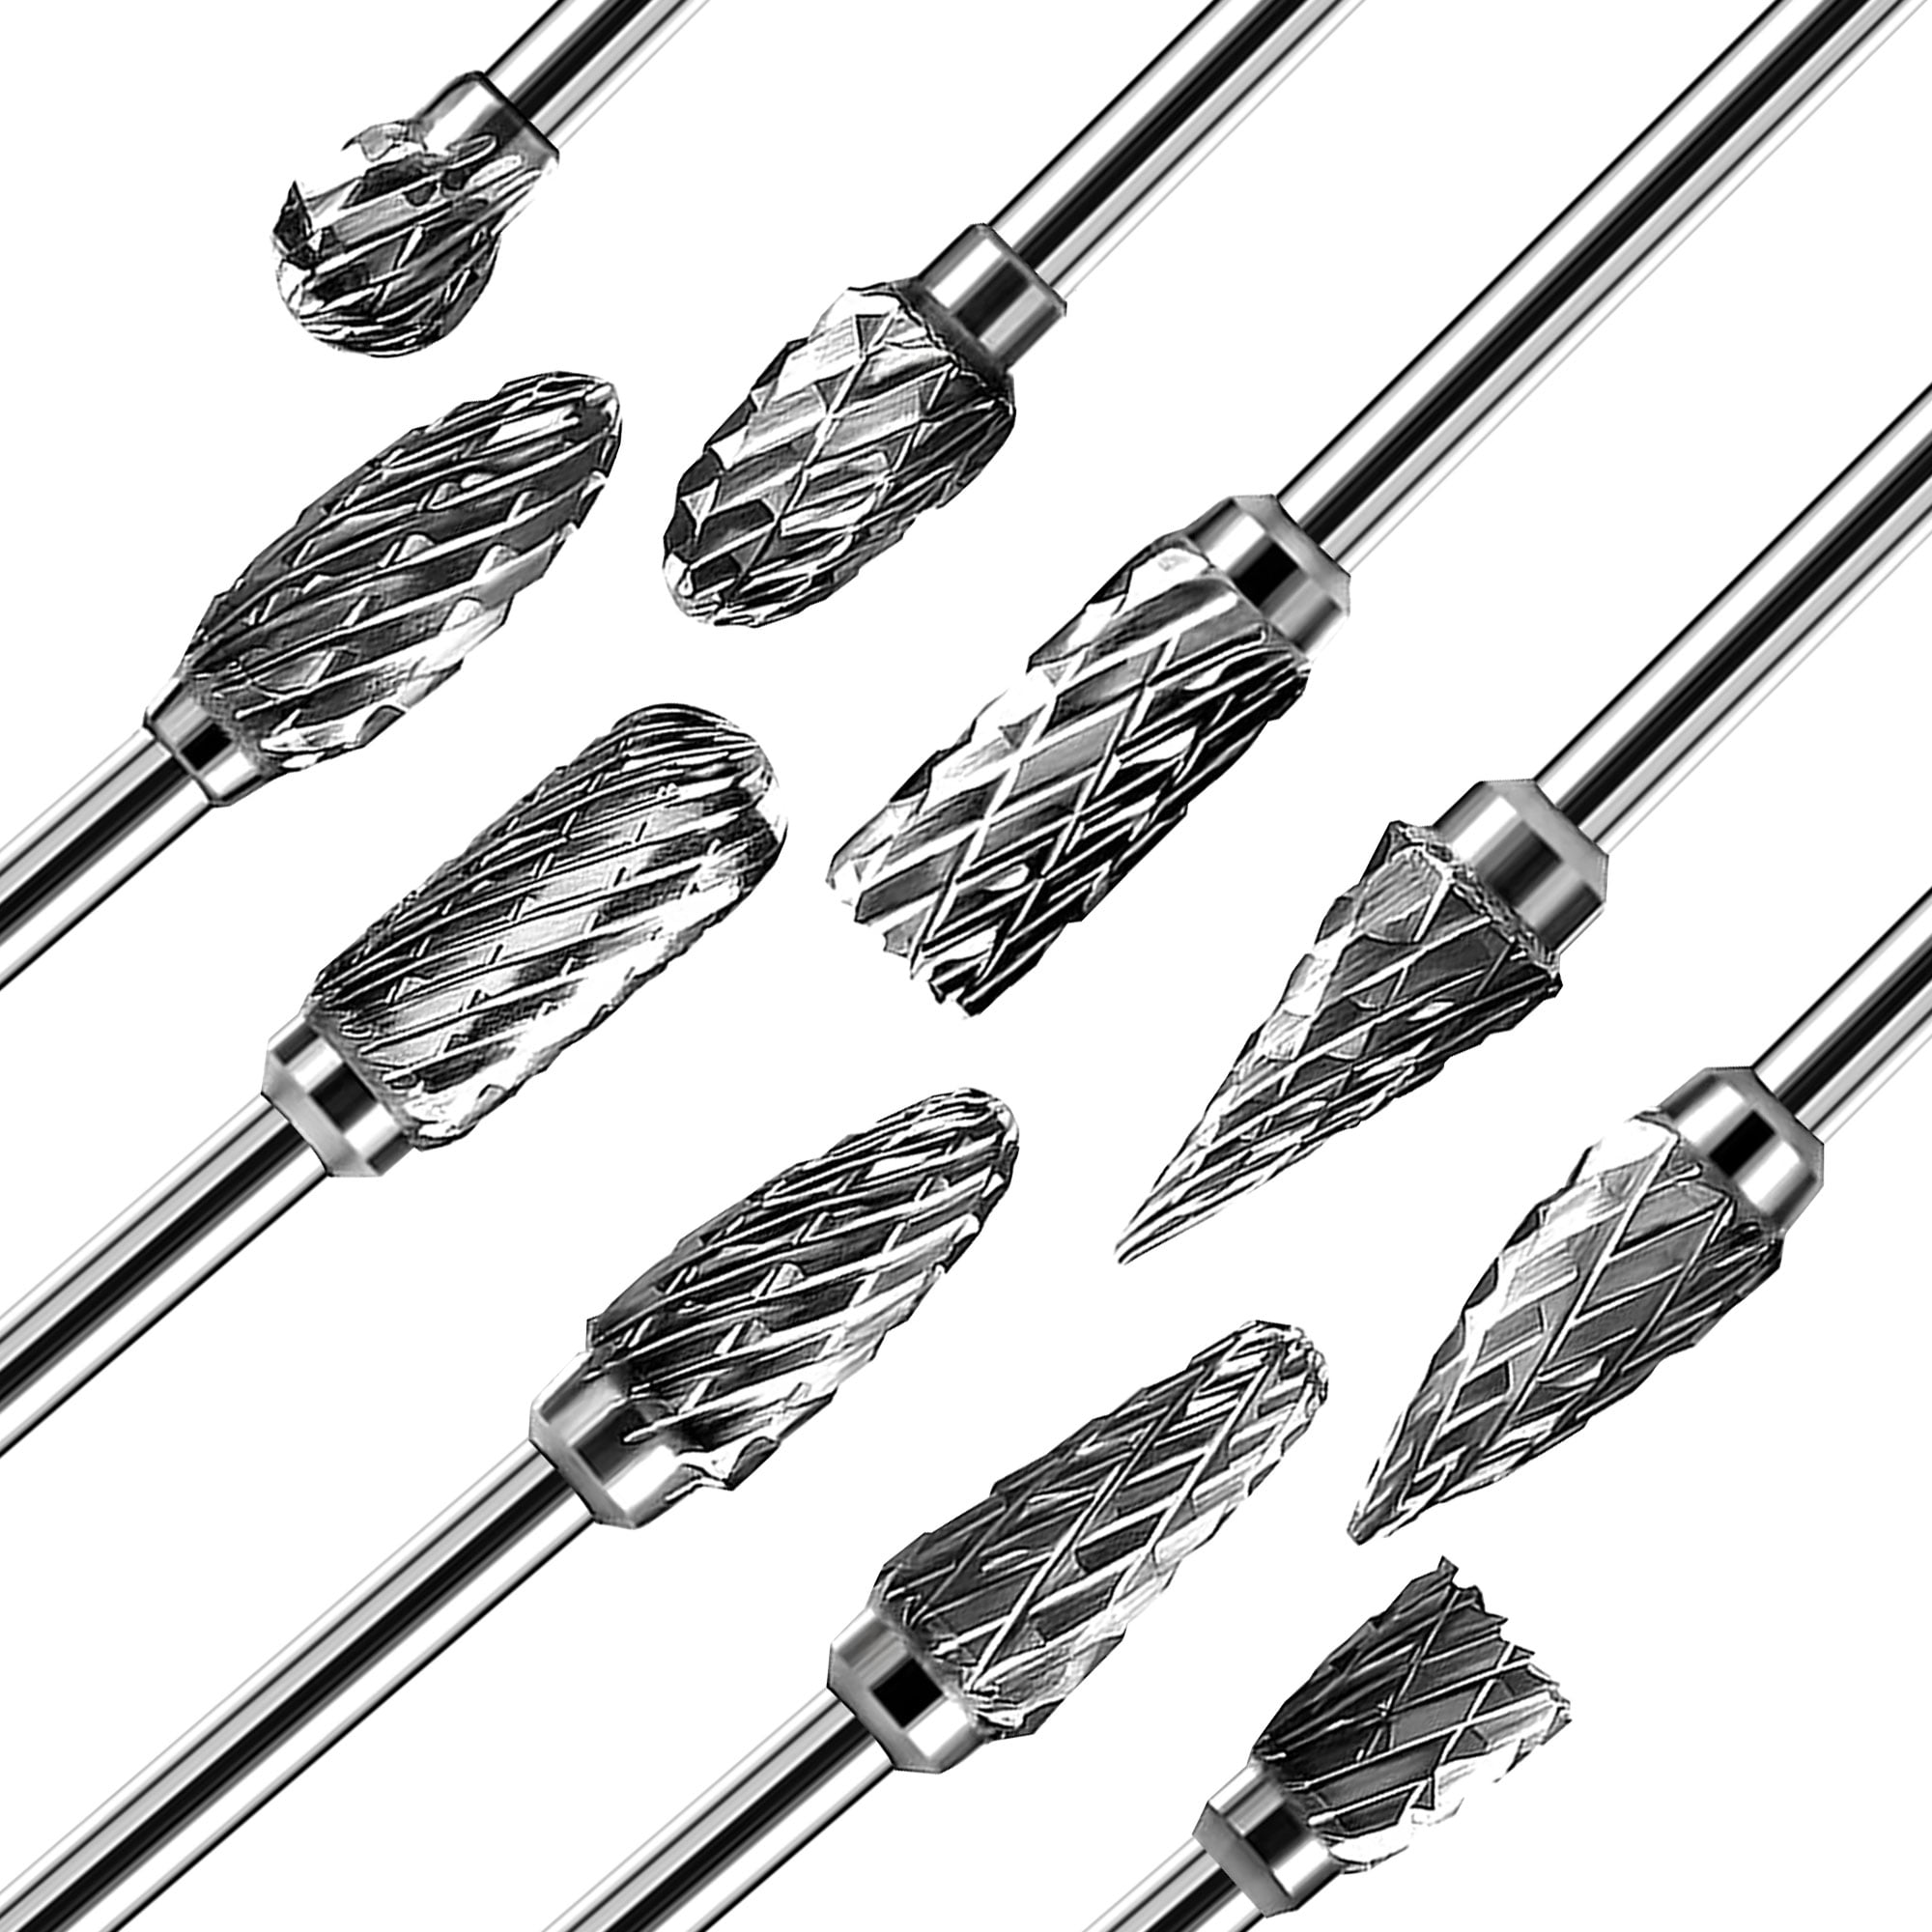 Carbide Burr Set Die Grinder Bits Rotary Tool Bits 1/8 Shank 20 PC Double  Cut Compatible with Dremel Wood Carving Accessories Cutting Burrs Metal